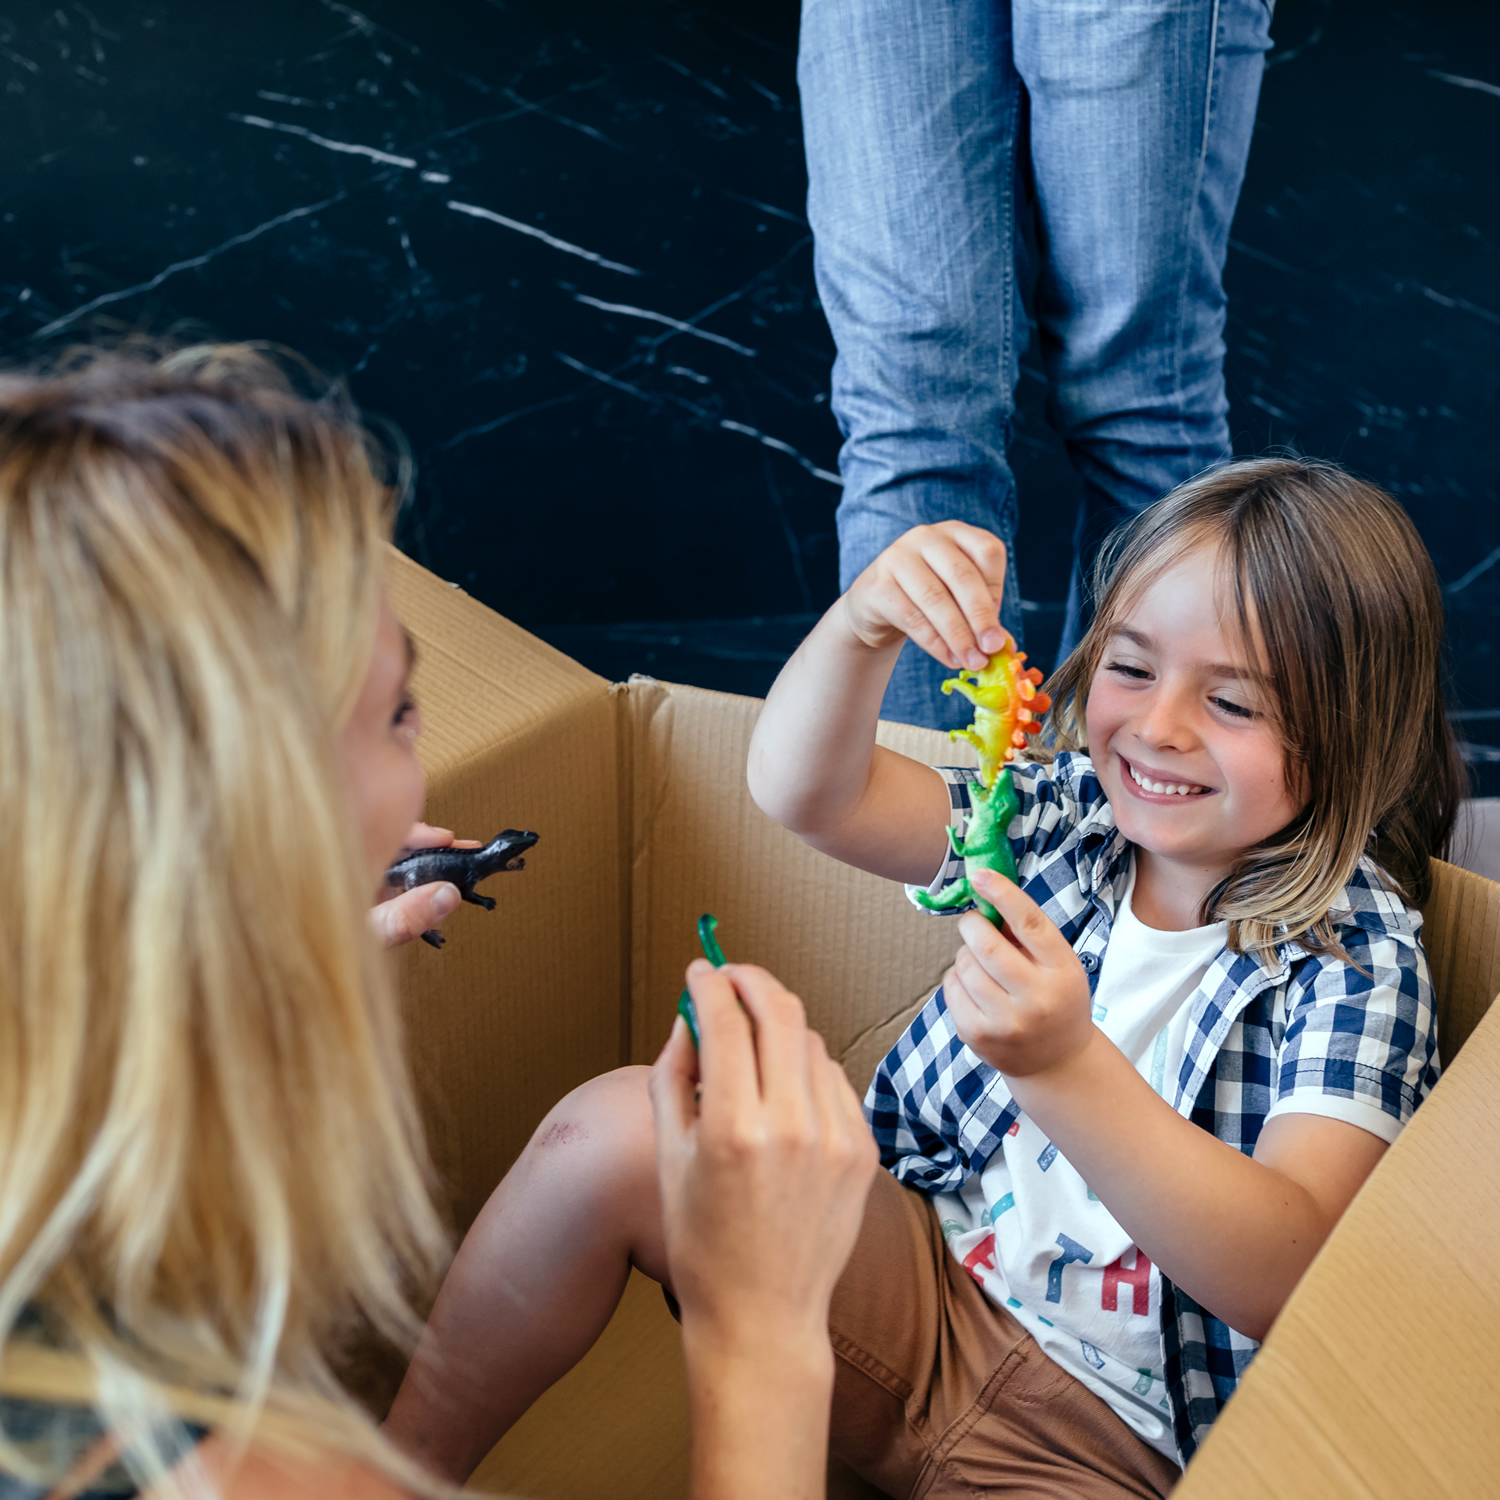 A child sits in a cardboard box holding a toy, smiling at an adult who is also holding a toy, as if they were playing in a busy warehouse. Another person is standing nearby, adding to the joy of this imaginative scene.